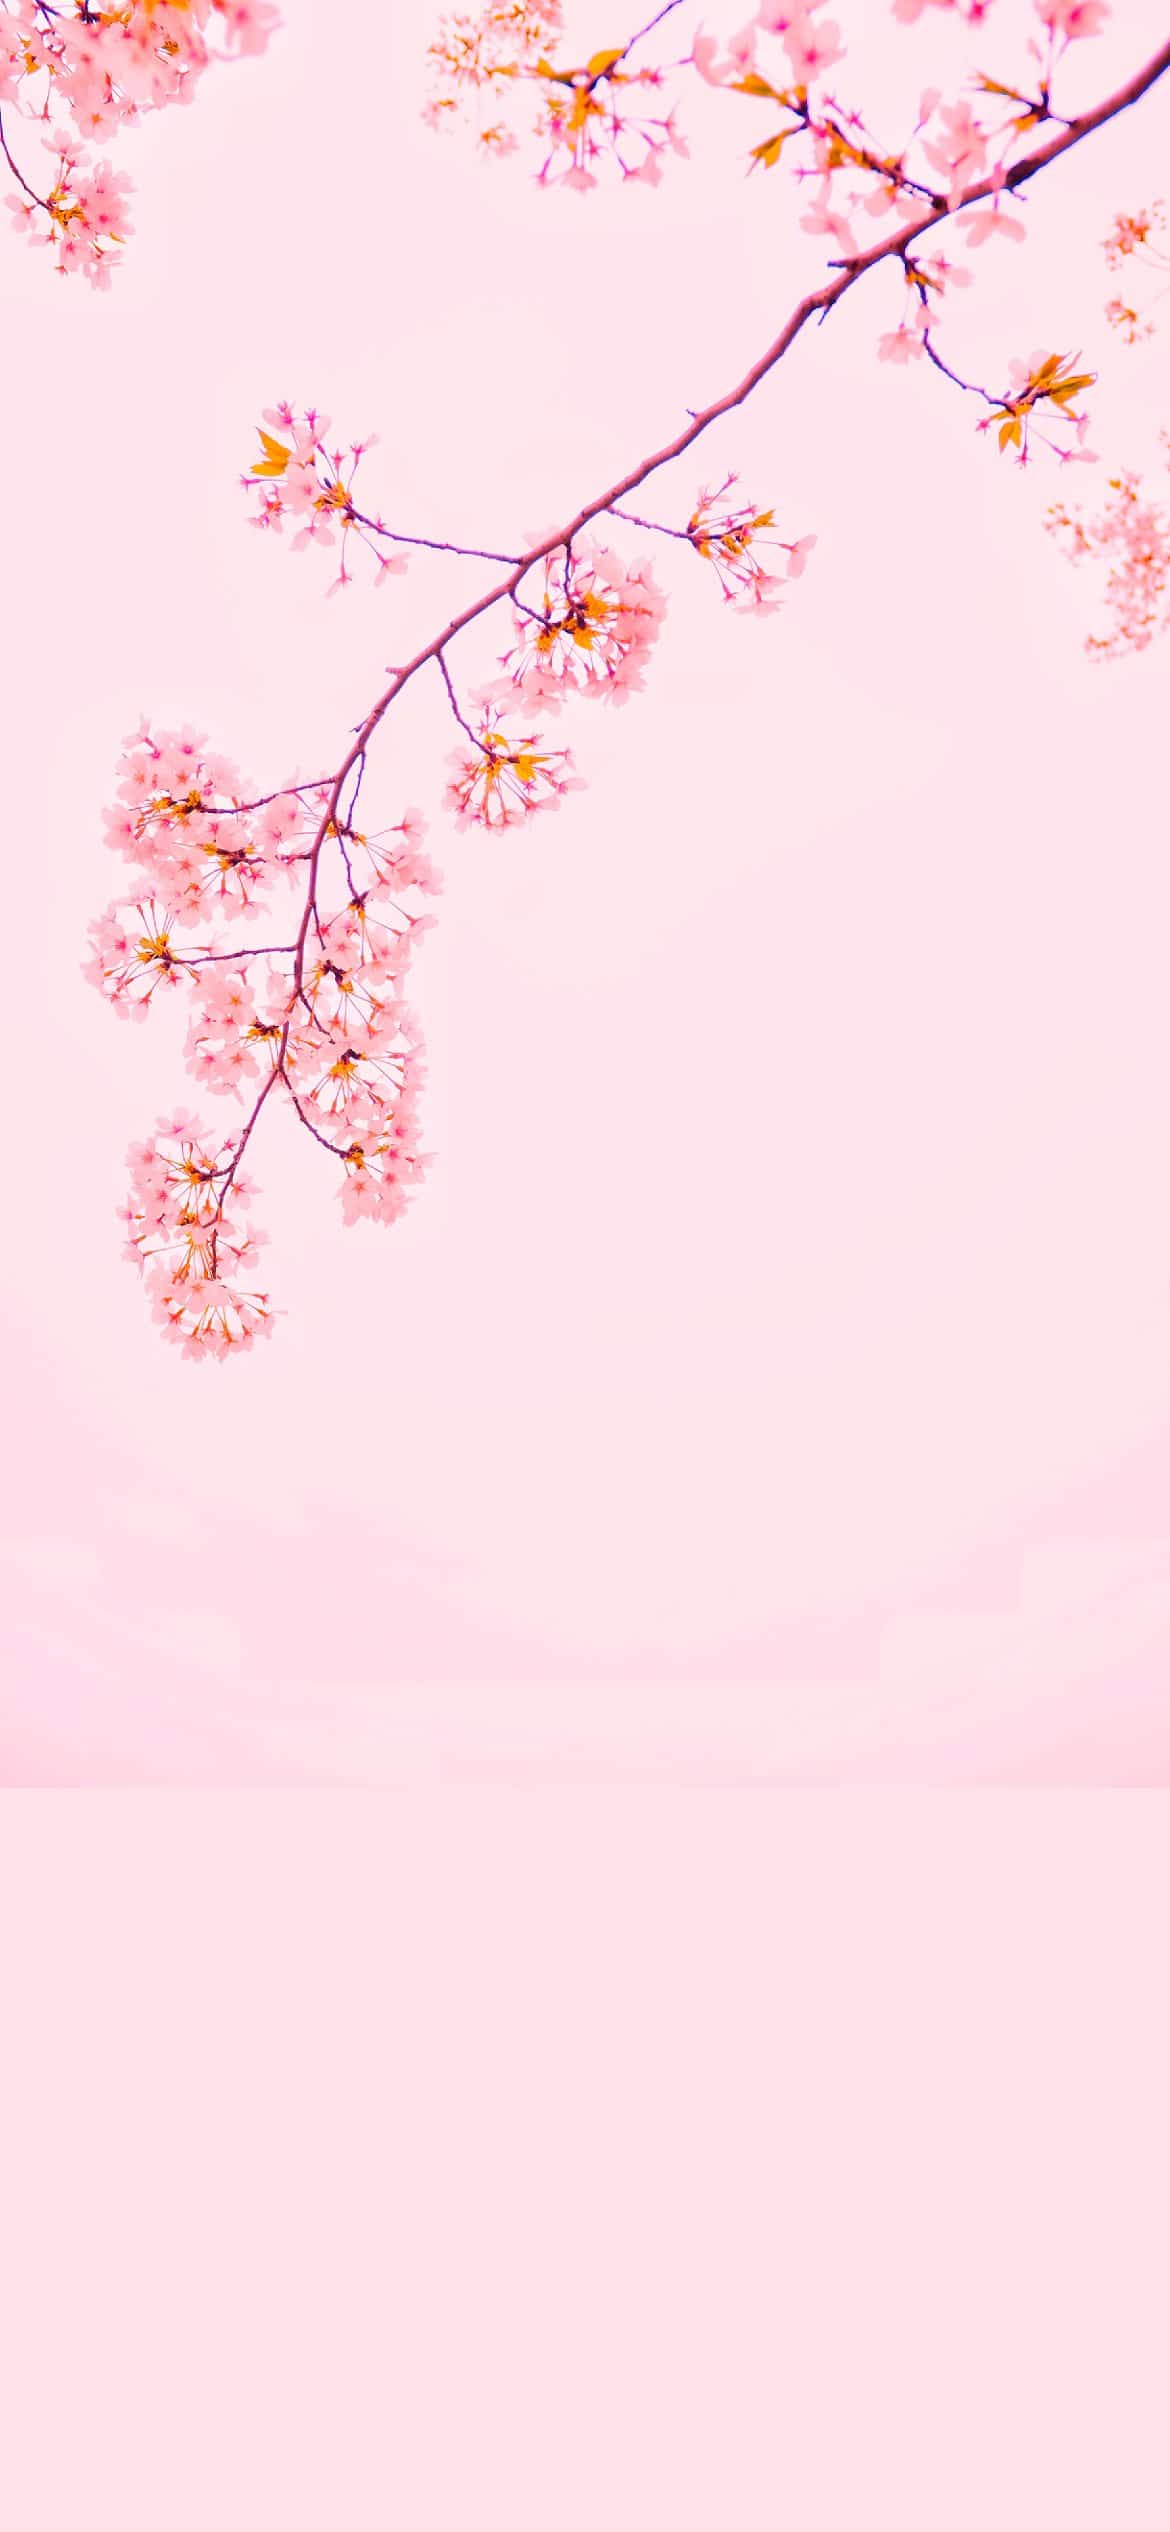 A branch of cherry blossoms on a pink background - Pink, pink phone, cute iPhone, cute pink, beautiful, cherry